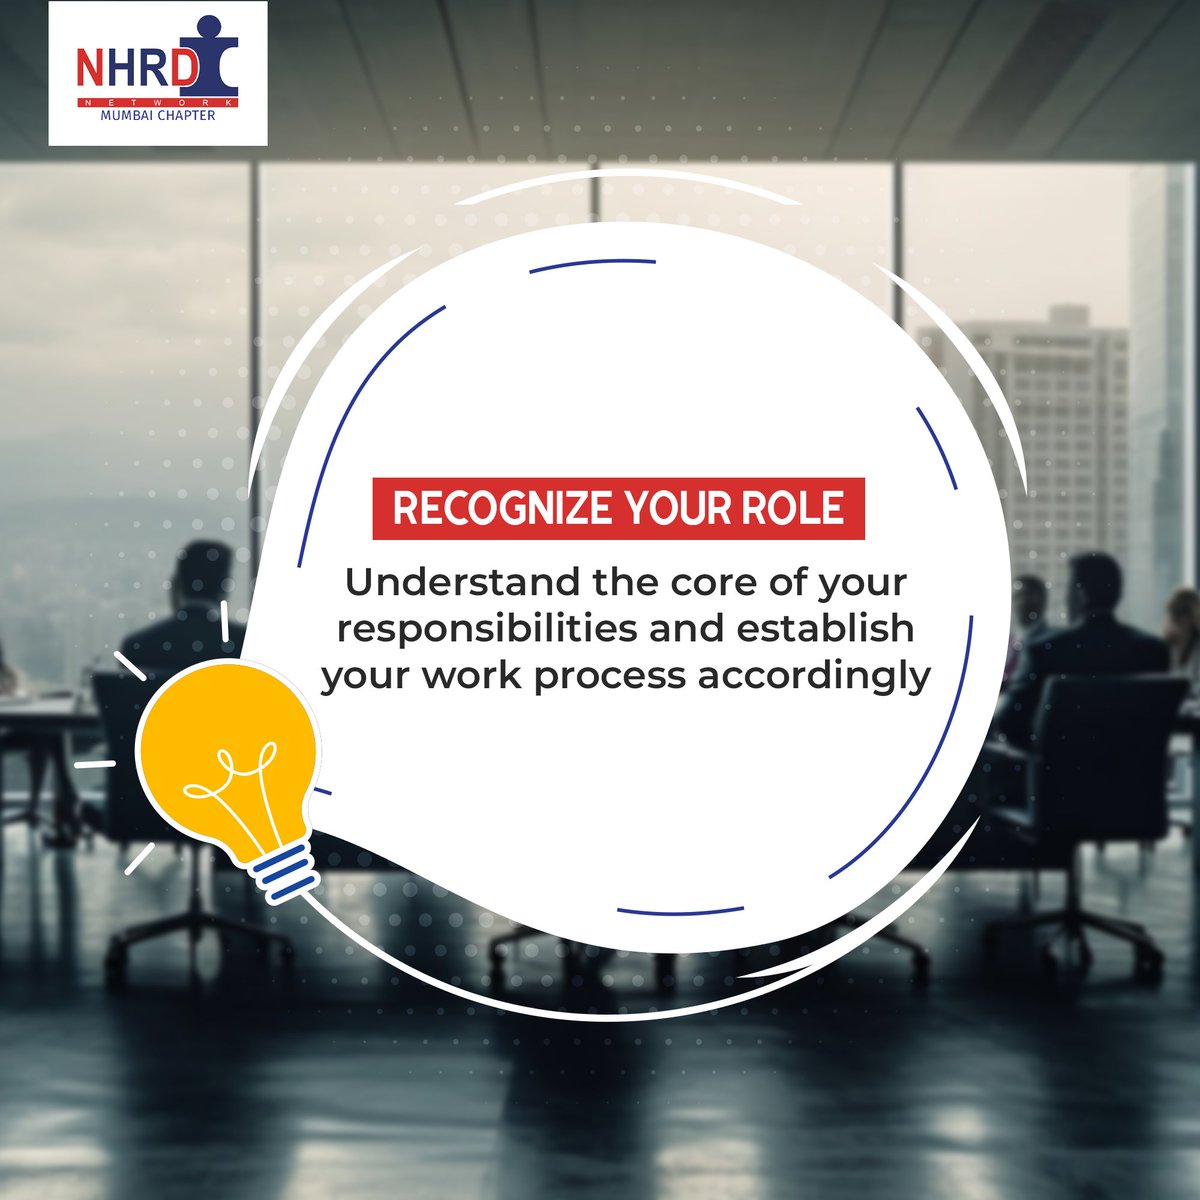 Recognizing your role and responsibilities is the first step towards growth. #NHRDN #NHRDNMumbai #Tips #TipOfTheDay #HRInsights #Networking #Network #HR #HRDepartment